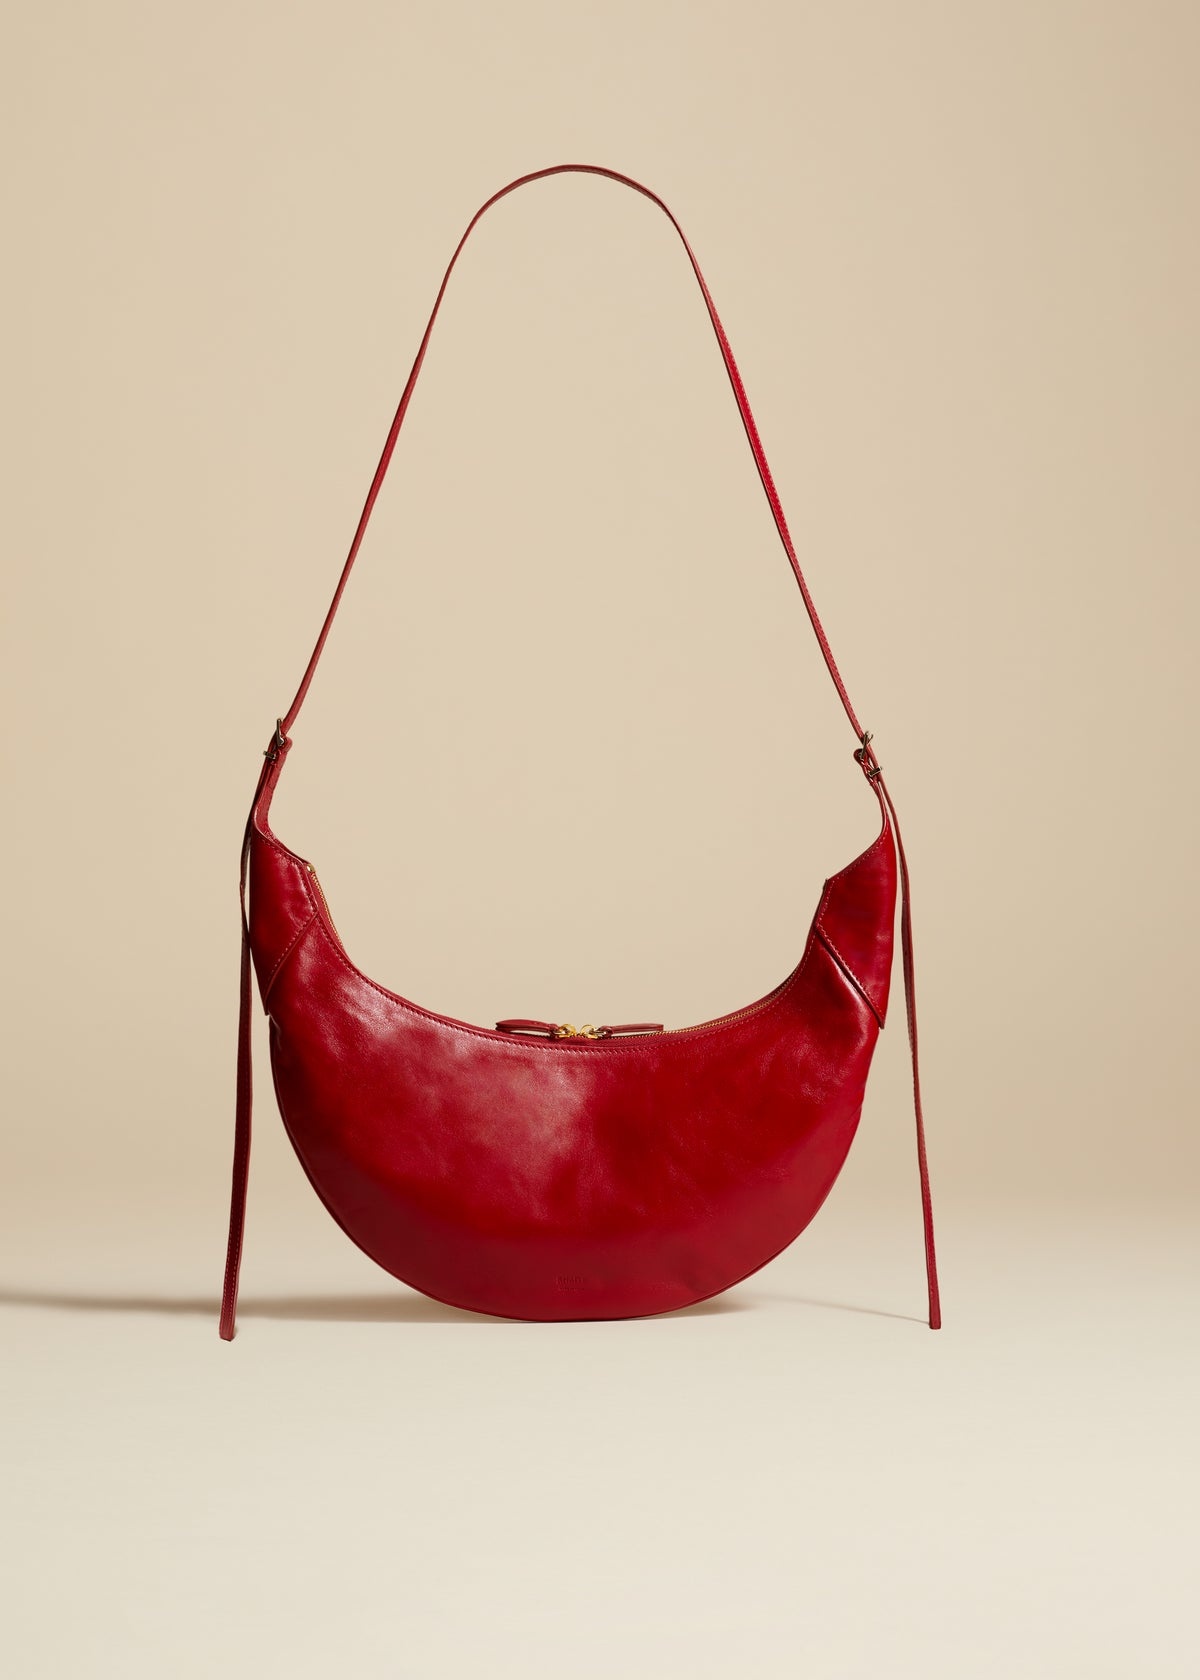 The Alessia Crossbody Bag in Fire Red Leather - 1